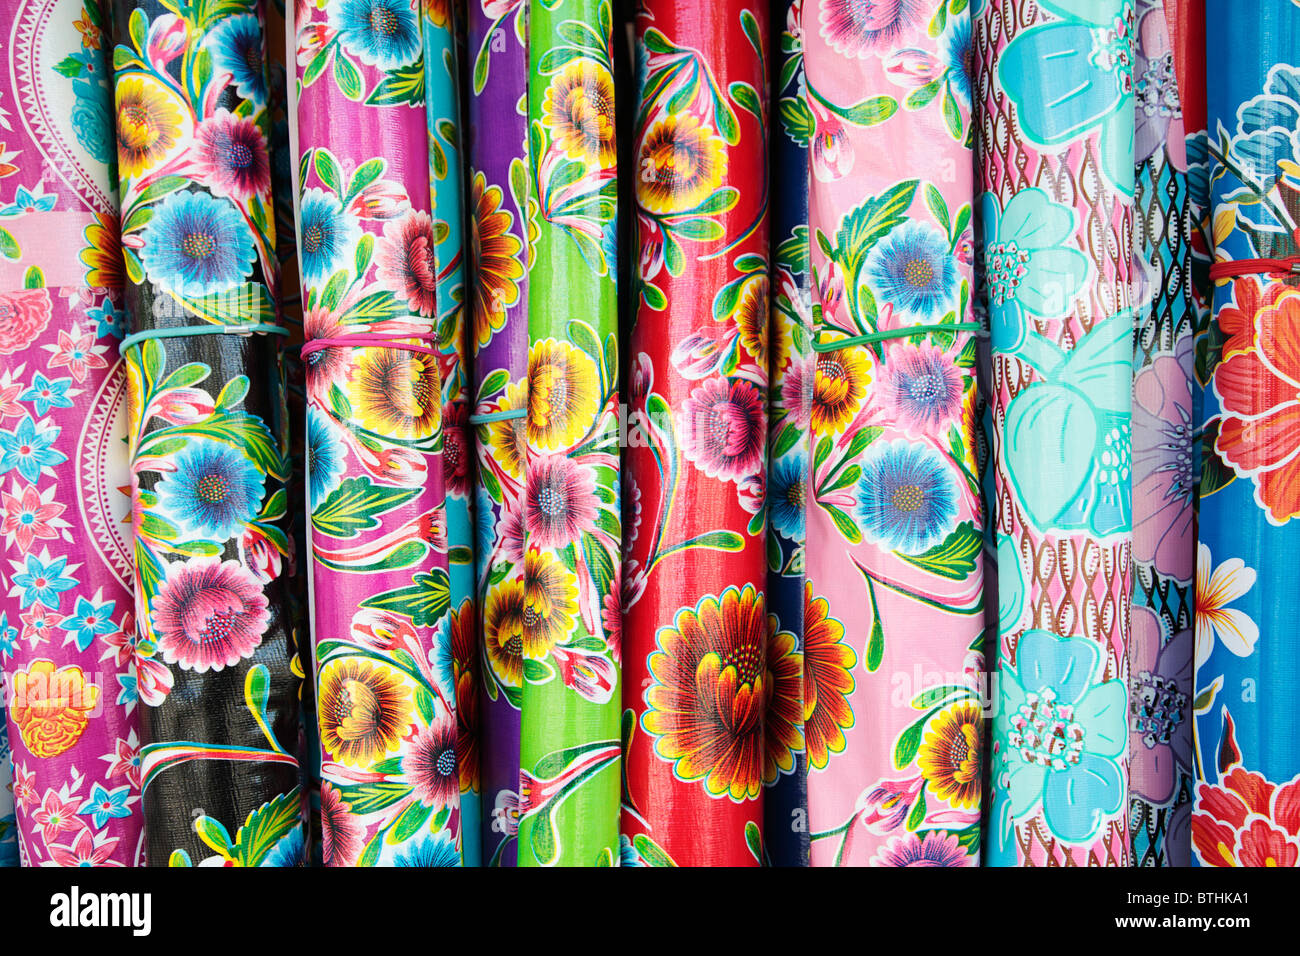 Rolls of Colourful Wrapping Paper Stock Photo